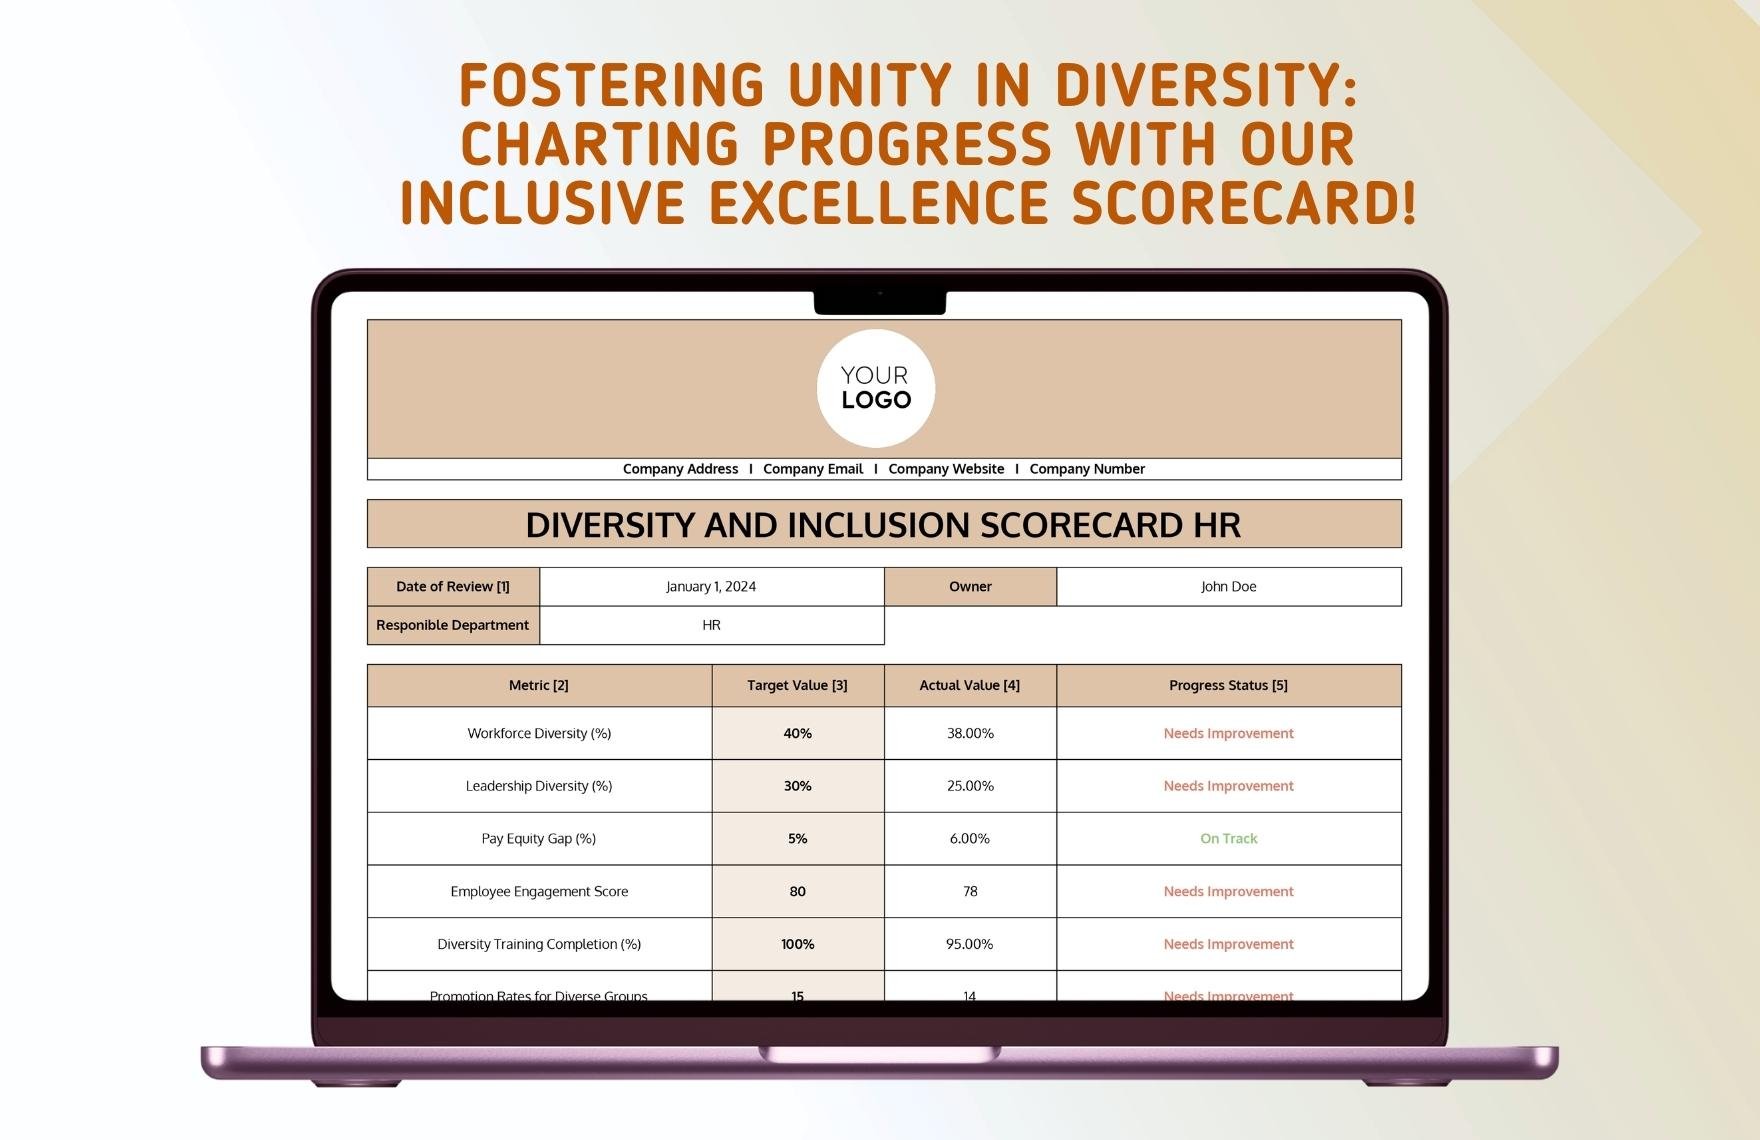 Diversity and Inclusion Scorecard HR Template